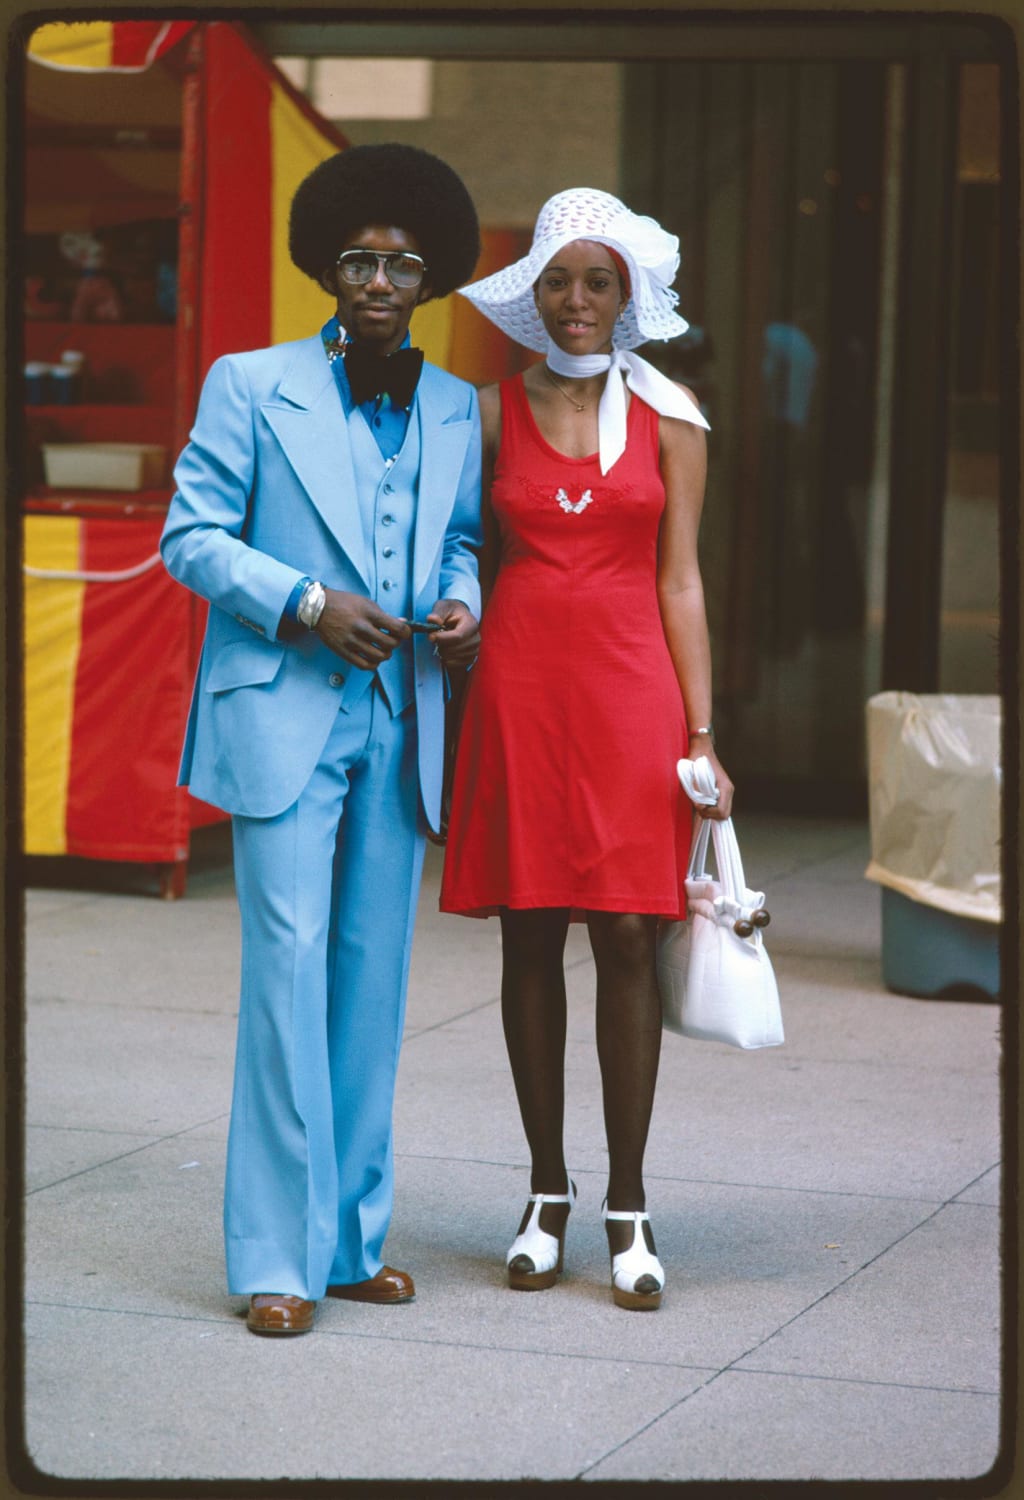 Couple on Michigan Avenue, Chicago, July, 1975 (photographed by Perry Riddle)